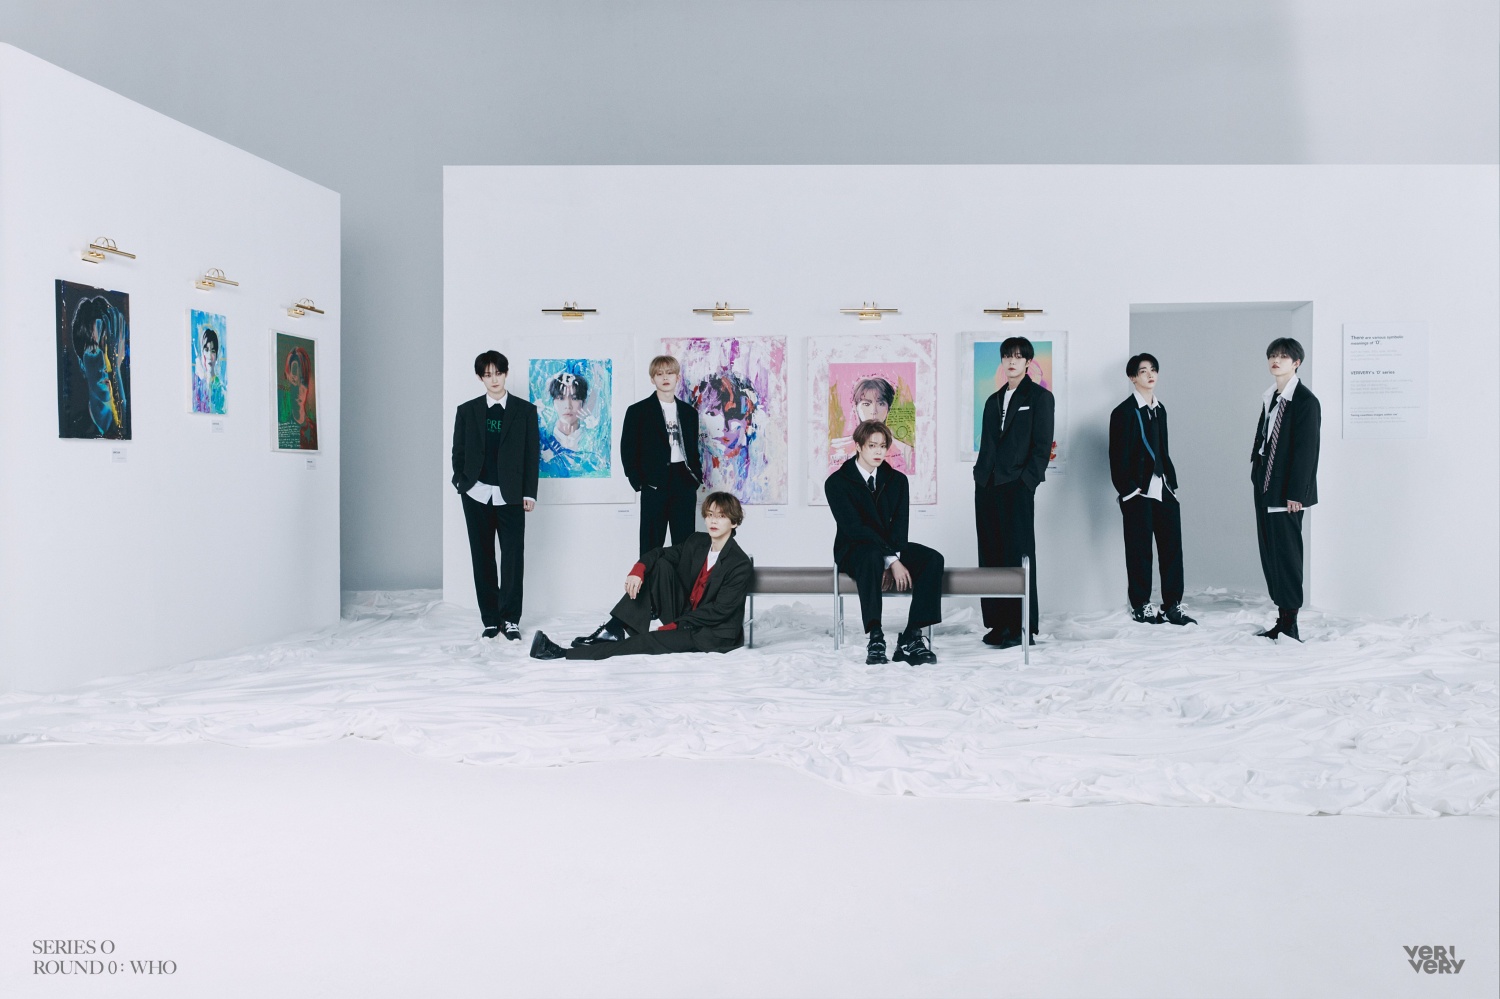 Verivery releases group photo ahead of comeback... narrow eyes